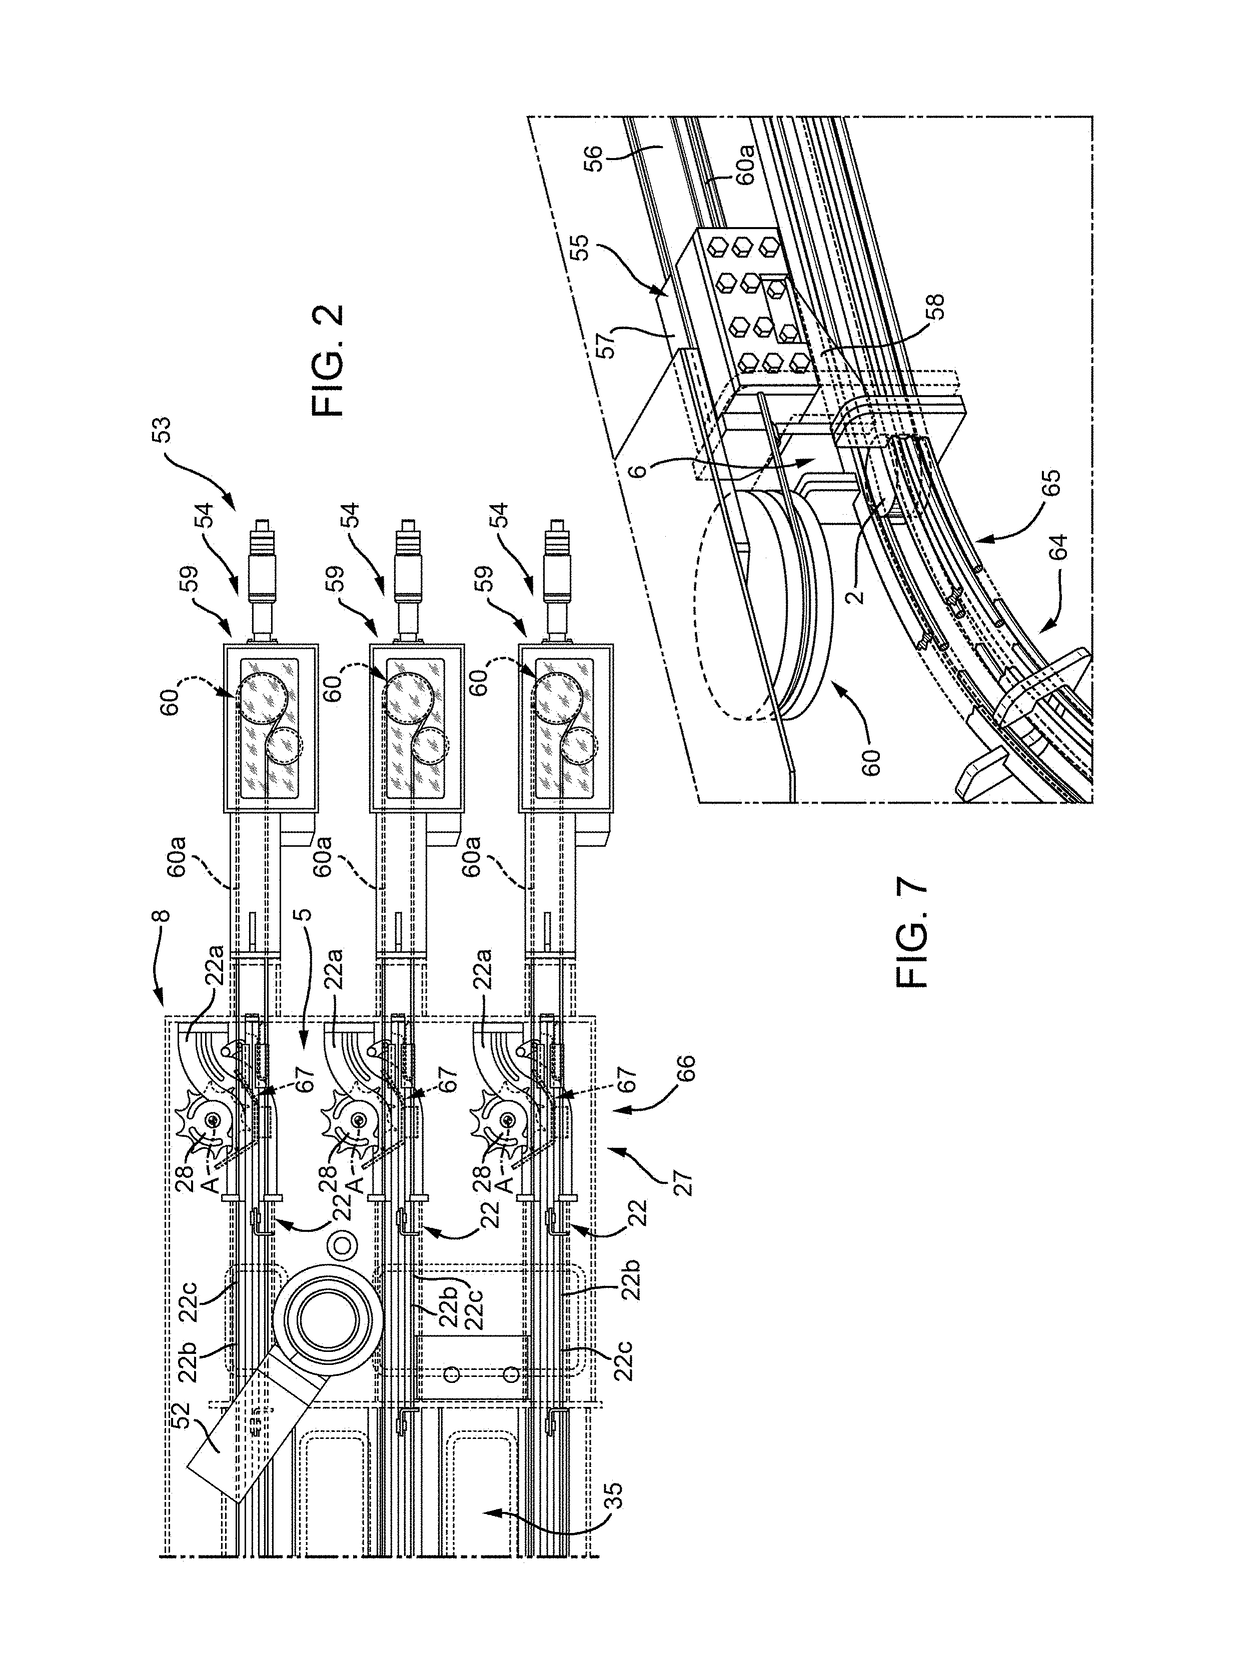 Apparatus and method for sterilizing receptacle closures